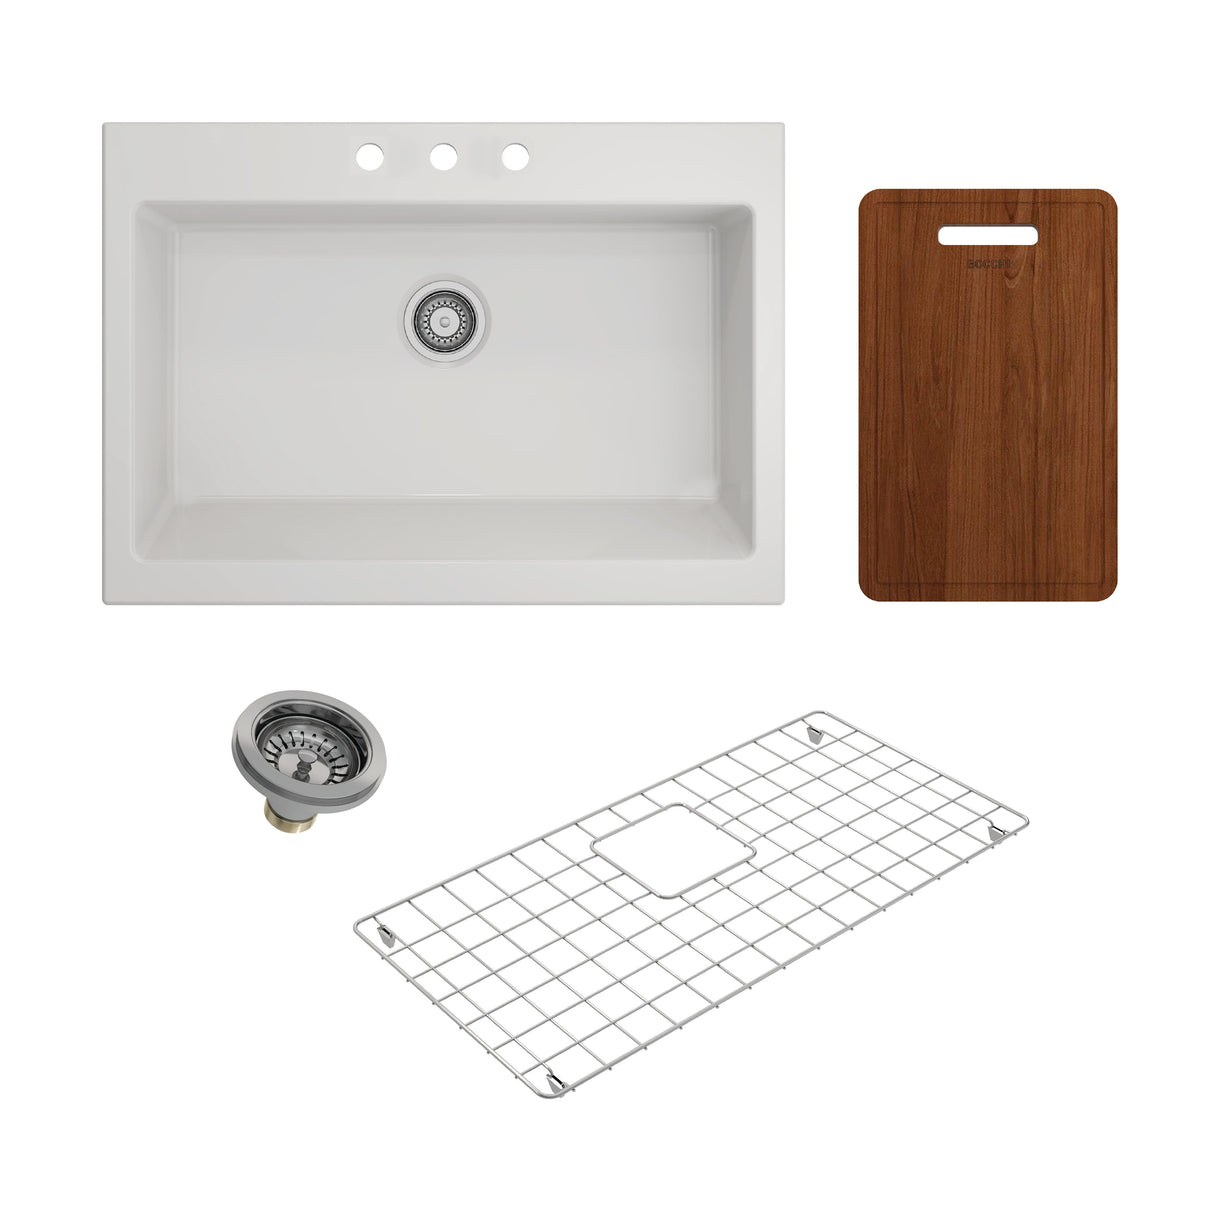 BOCCHI 1500-001-KIT1 Kit: 1500 Nuova Apron Front Drop-In Fireclay 34 in. Single Bowl Kitchen Sink with Protective Bottom Grid and Strainer & Cutting Board